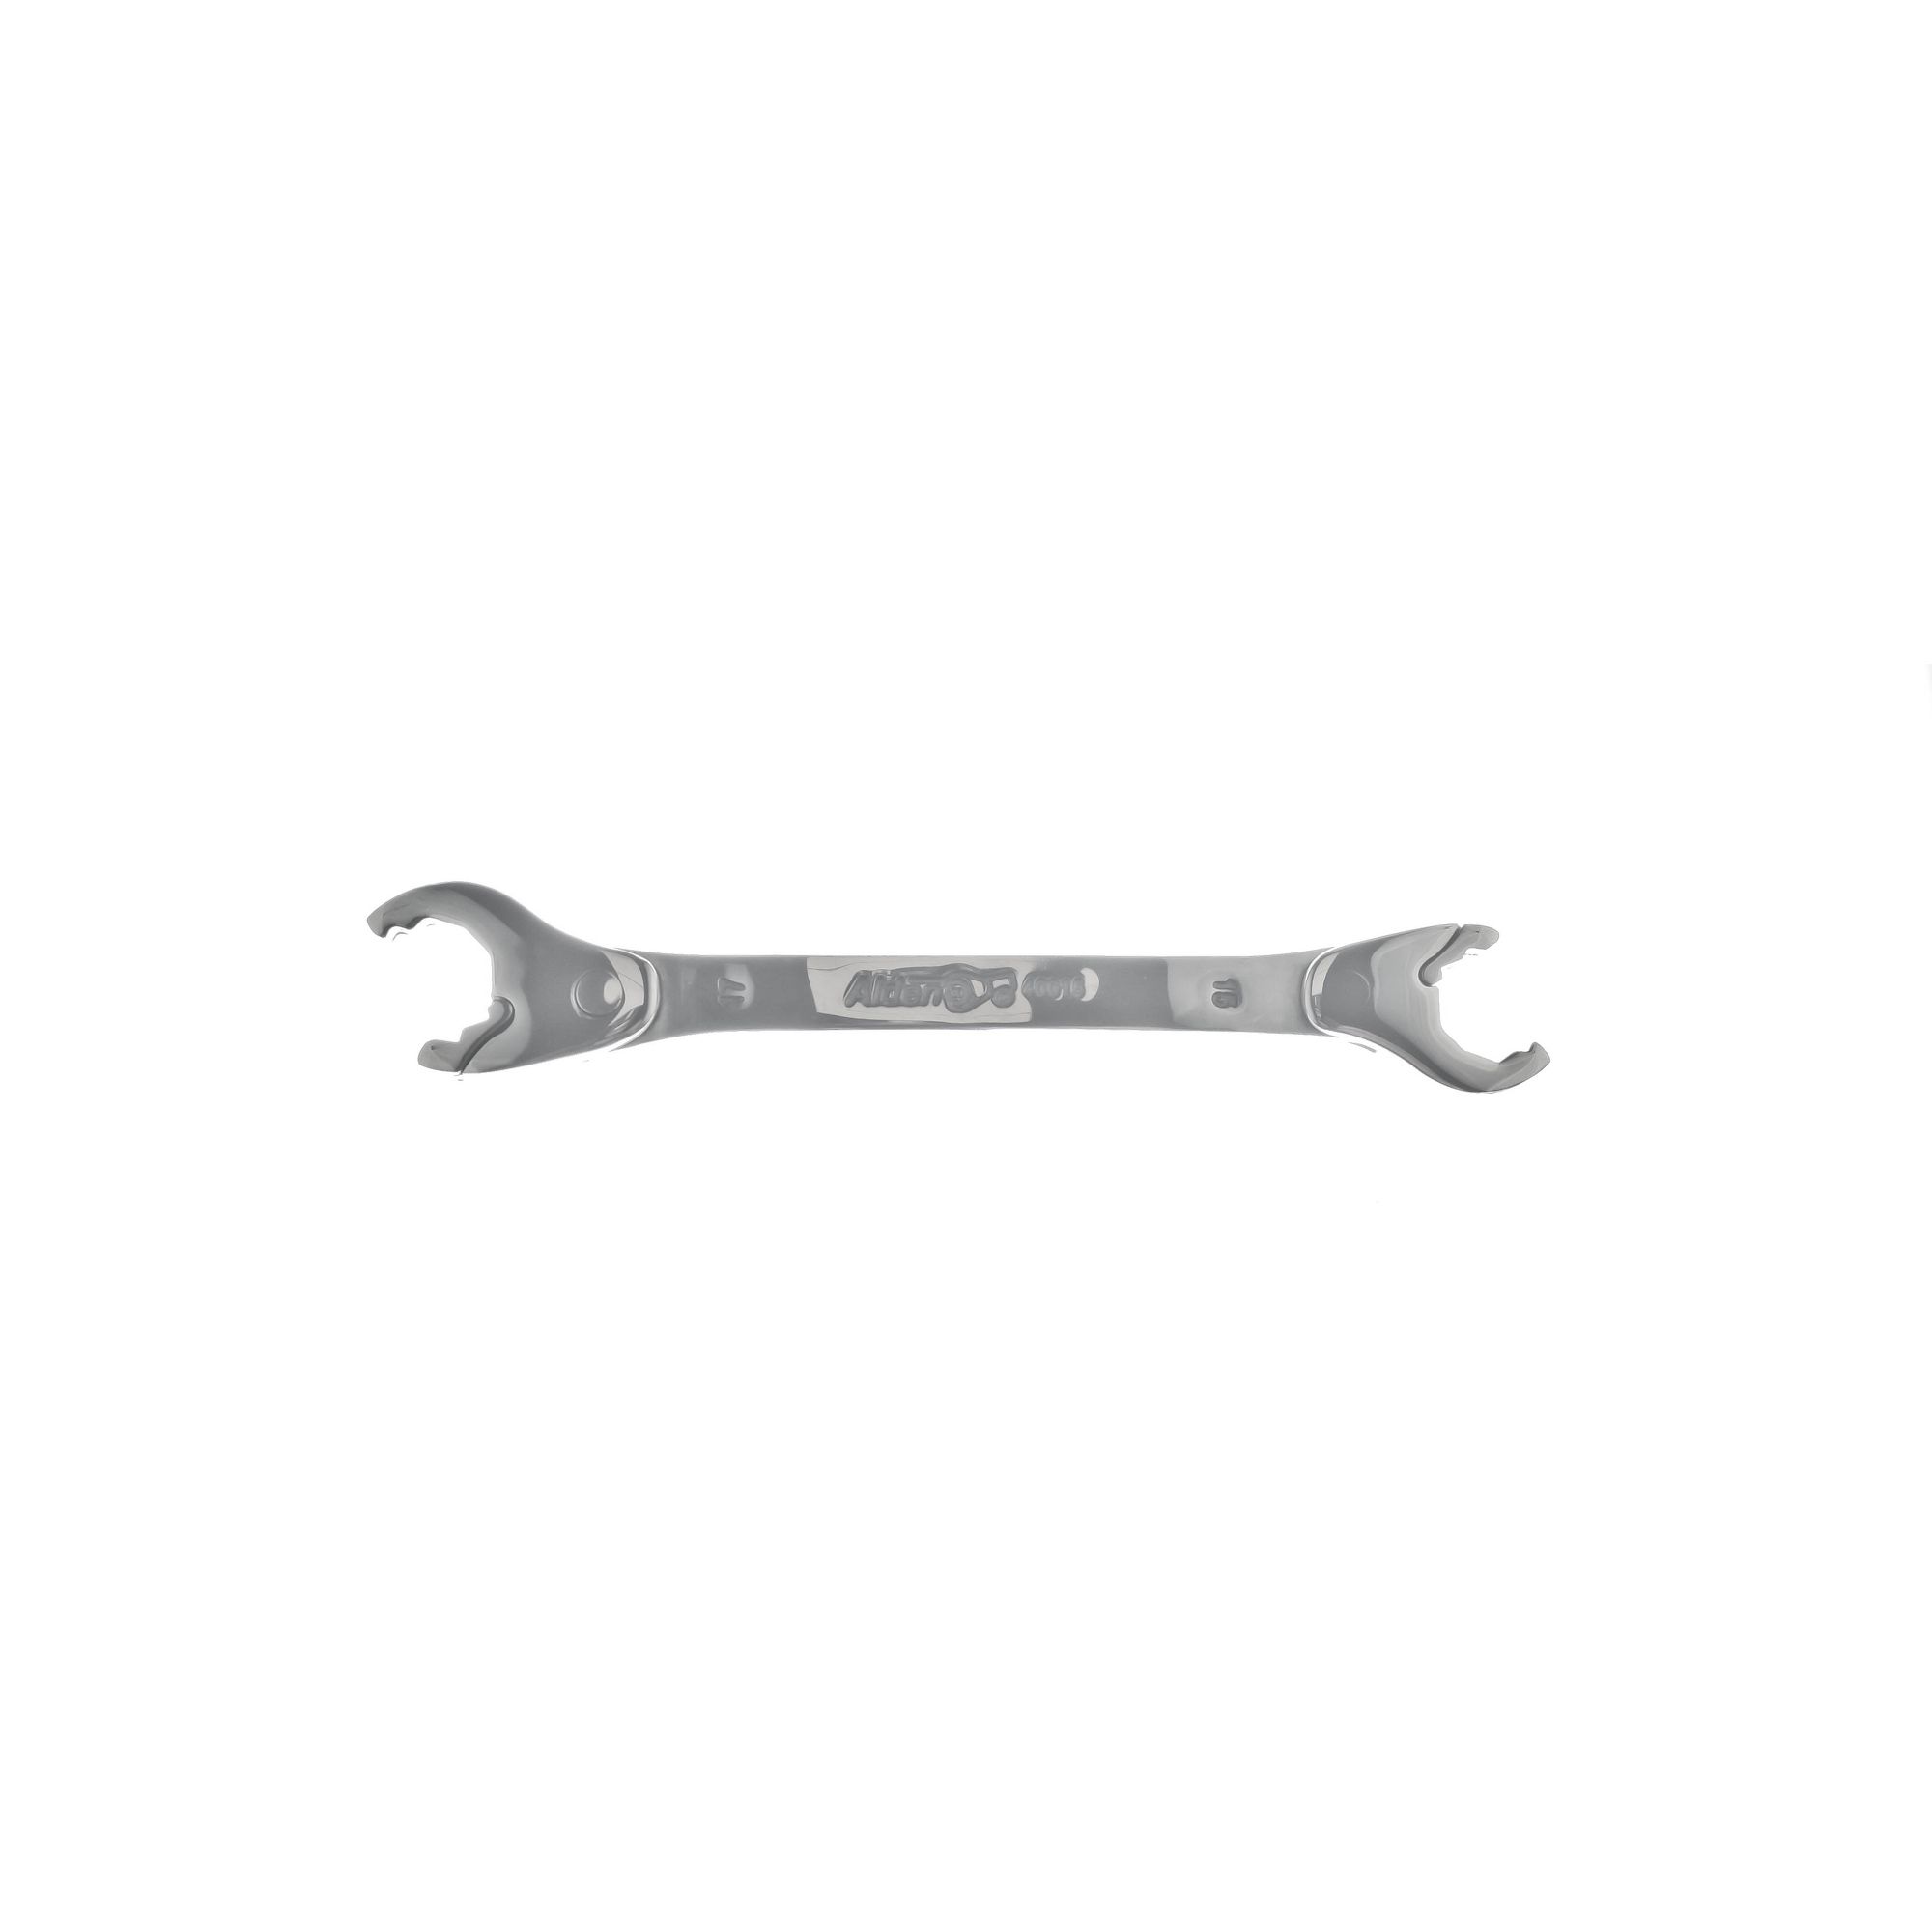 Chicago Brand 15 - 17mm Open-End Ratchet Combination Wrench